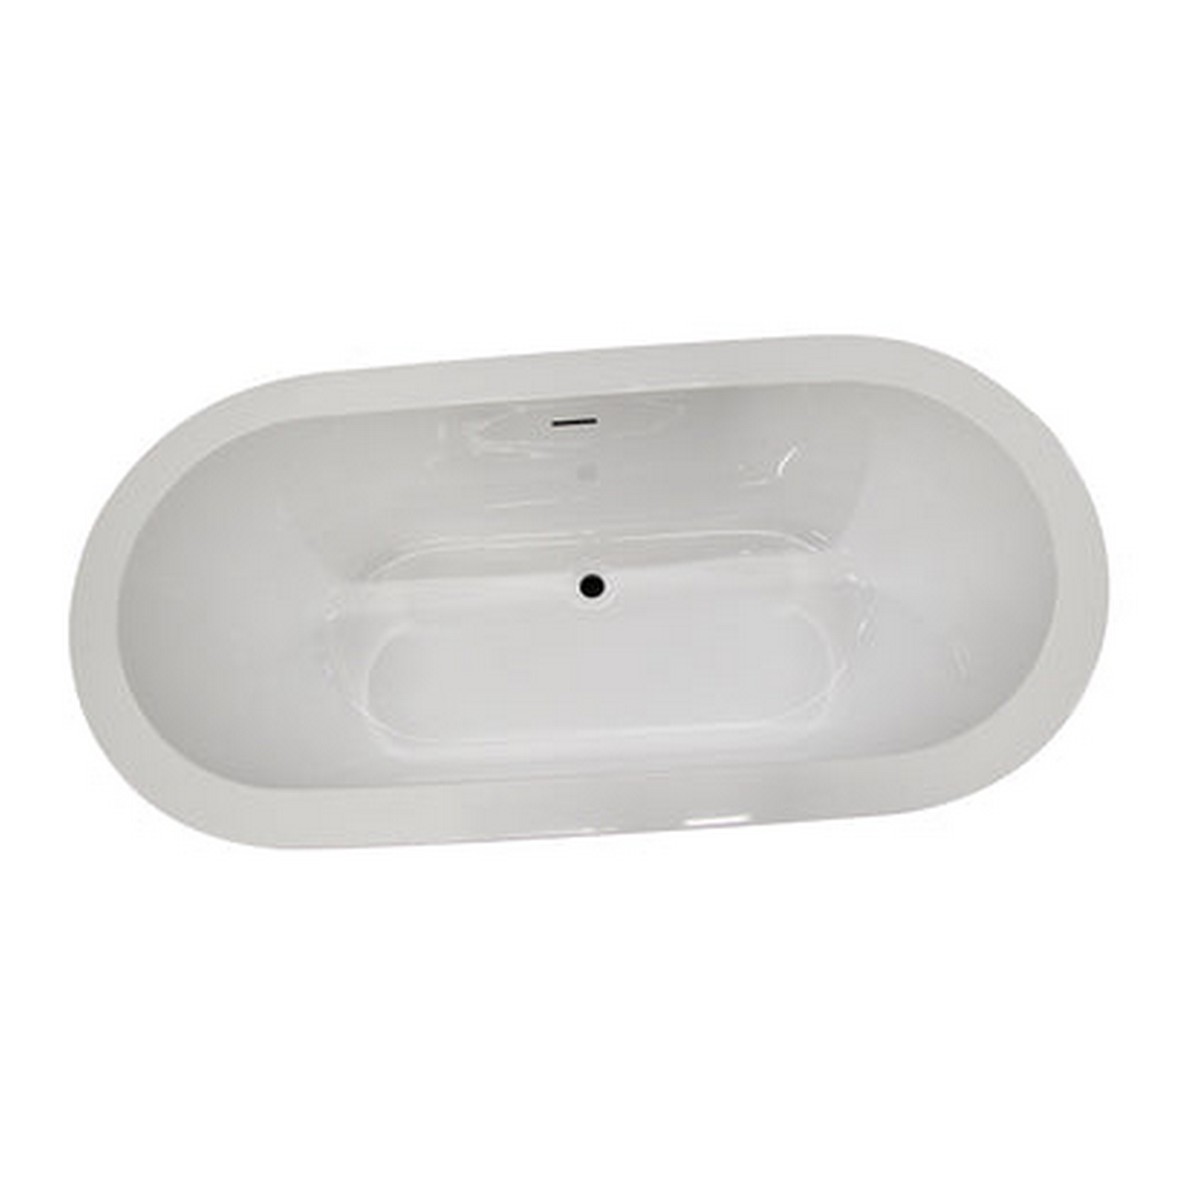 BARCLAY ATOVN63EIG PASCAL 63 INCH ACRYLIC FREESTANDING OVAL SOAKING BATHTUB WITH INTEGRAL DRAIN AND OVERFLOW